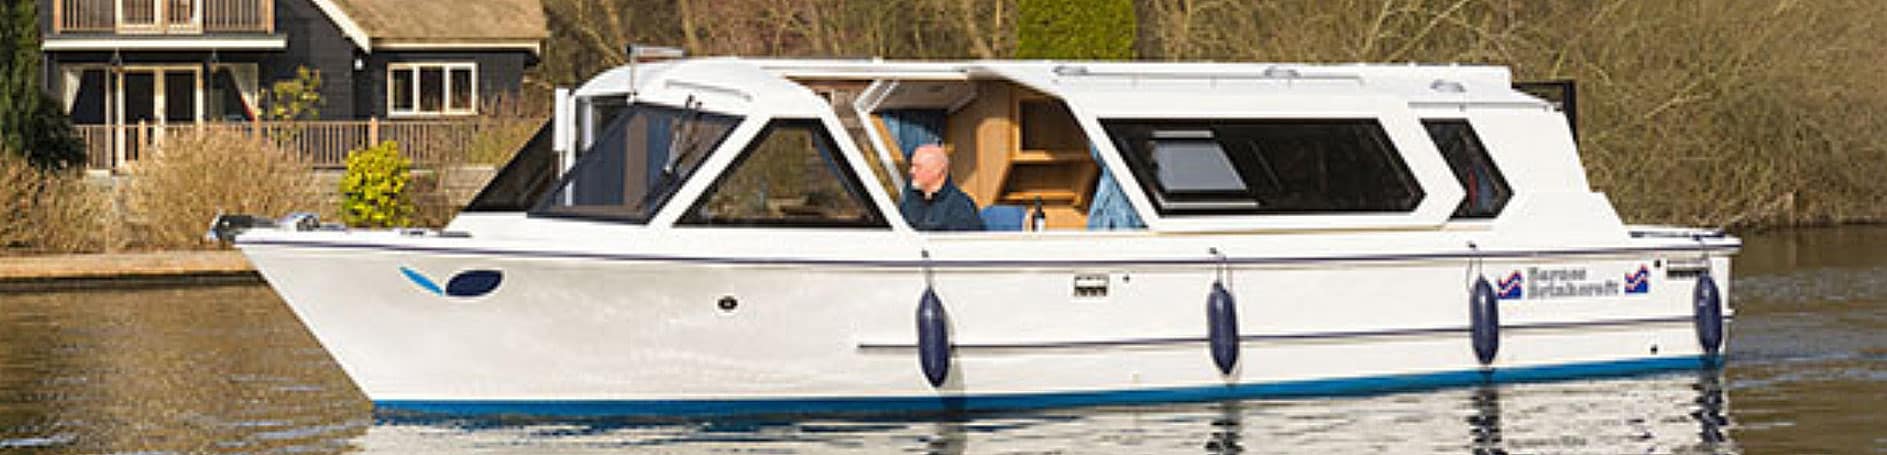 Boating Holidays For Couples On The Norfolk Broads